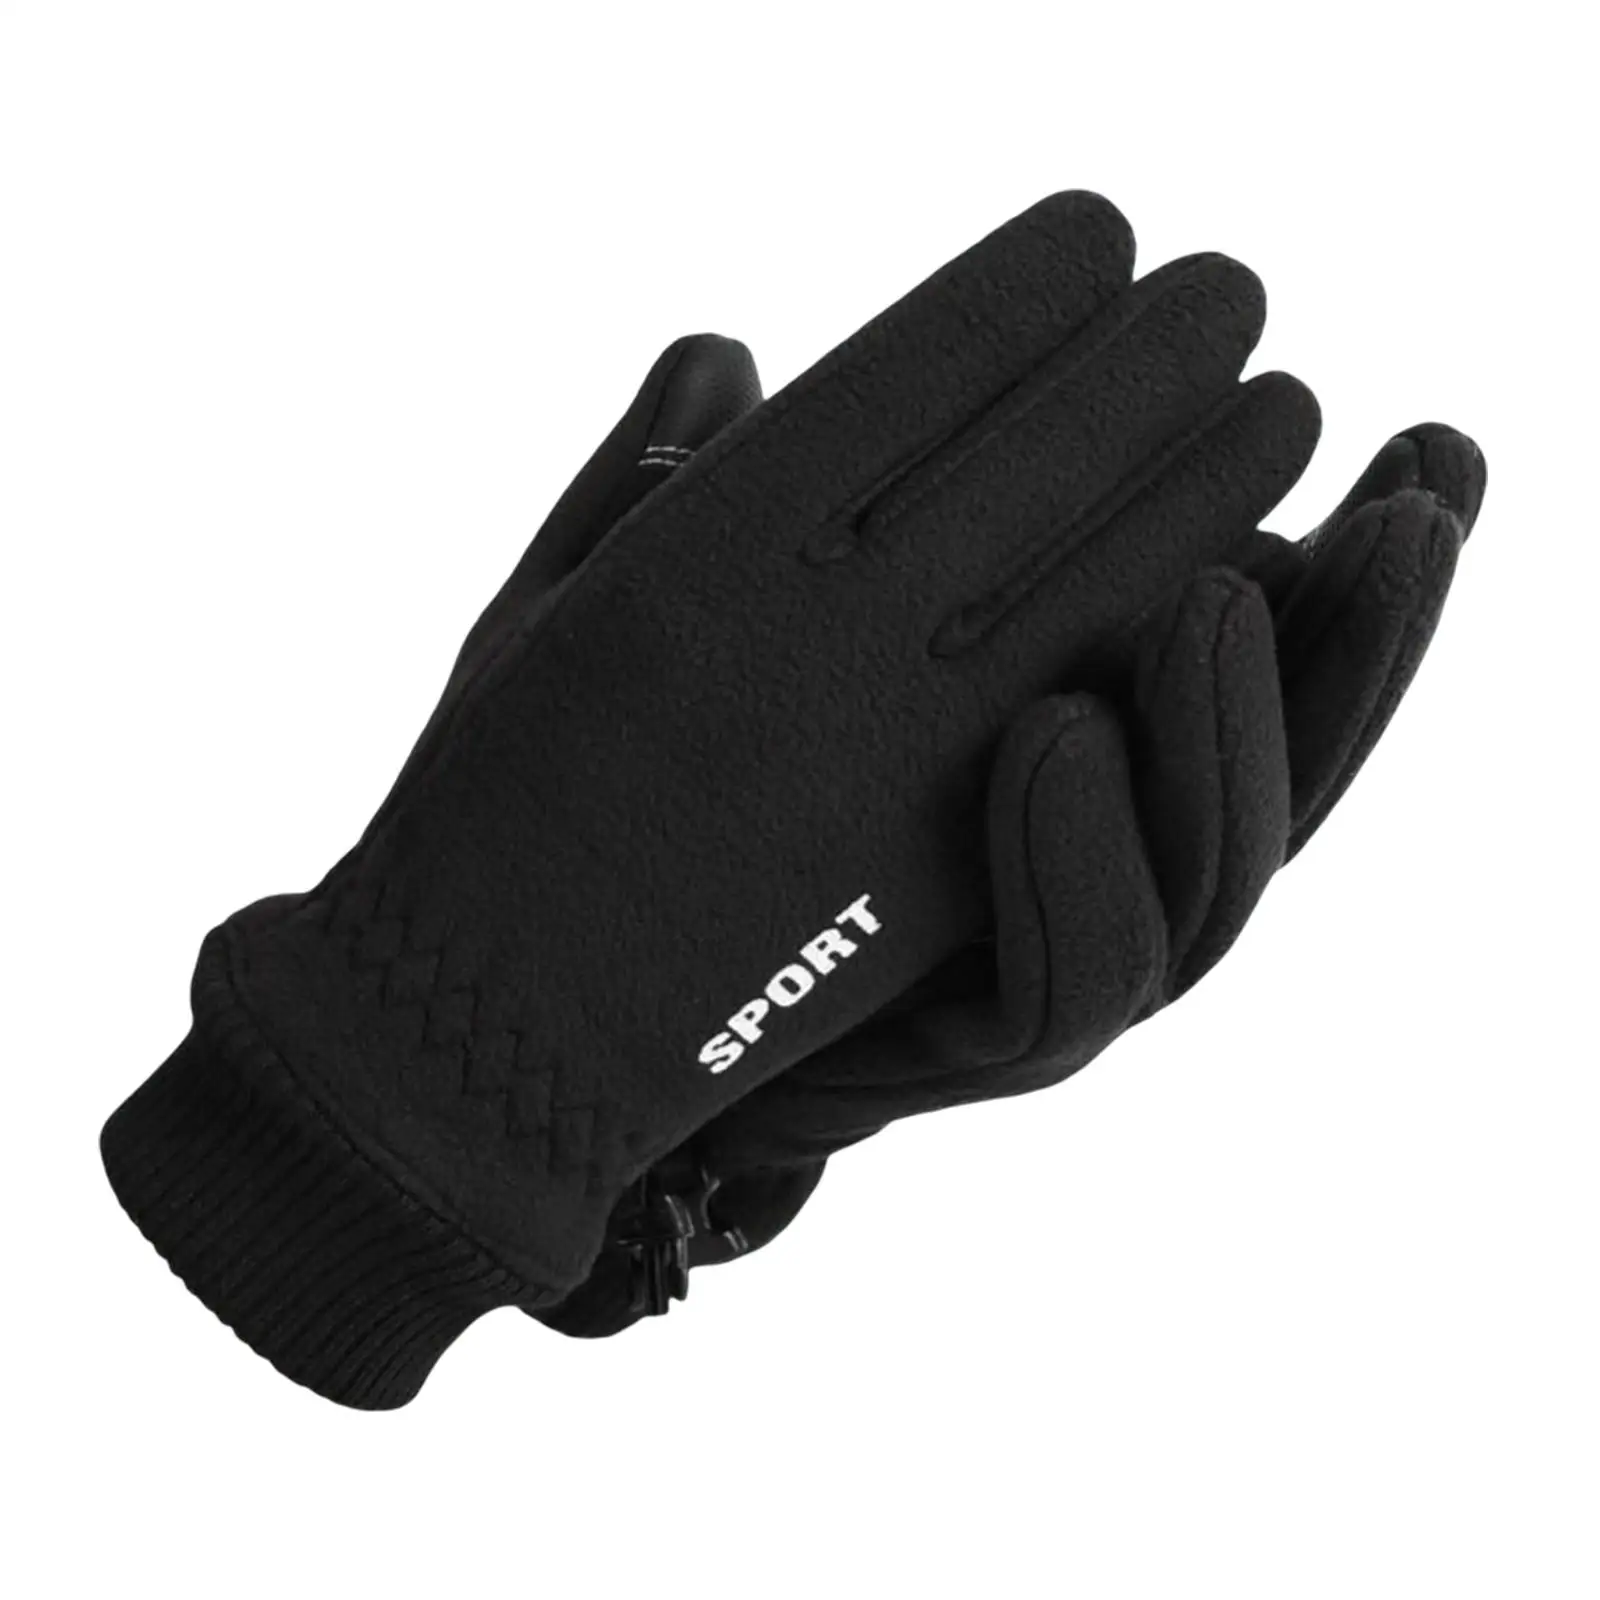 Winter Warm Gloves Thermal Gloves Hand Protection Touch Screen  Fleece for Running Camping Working Ski Men Women